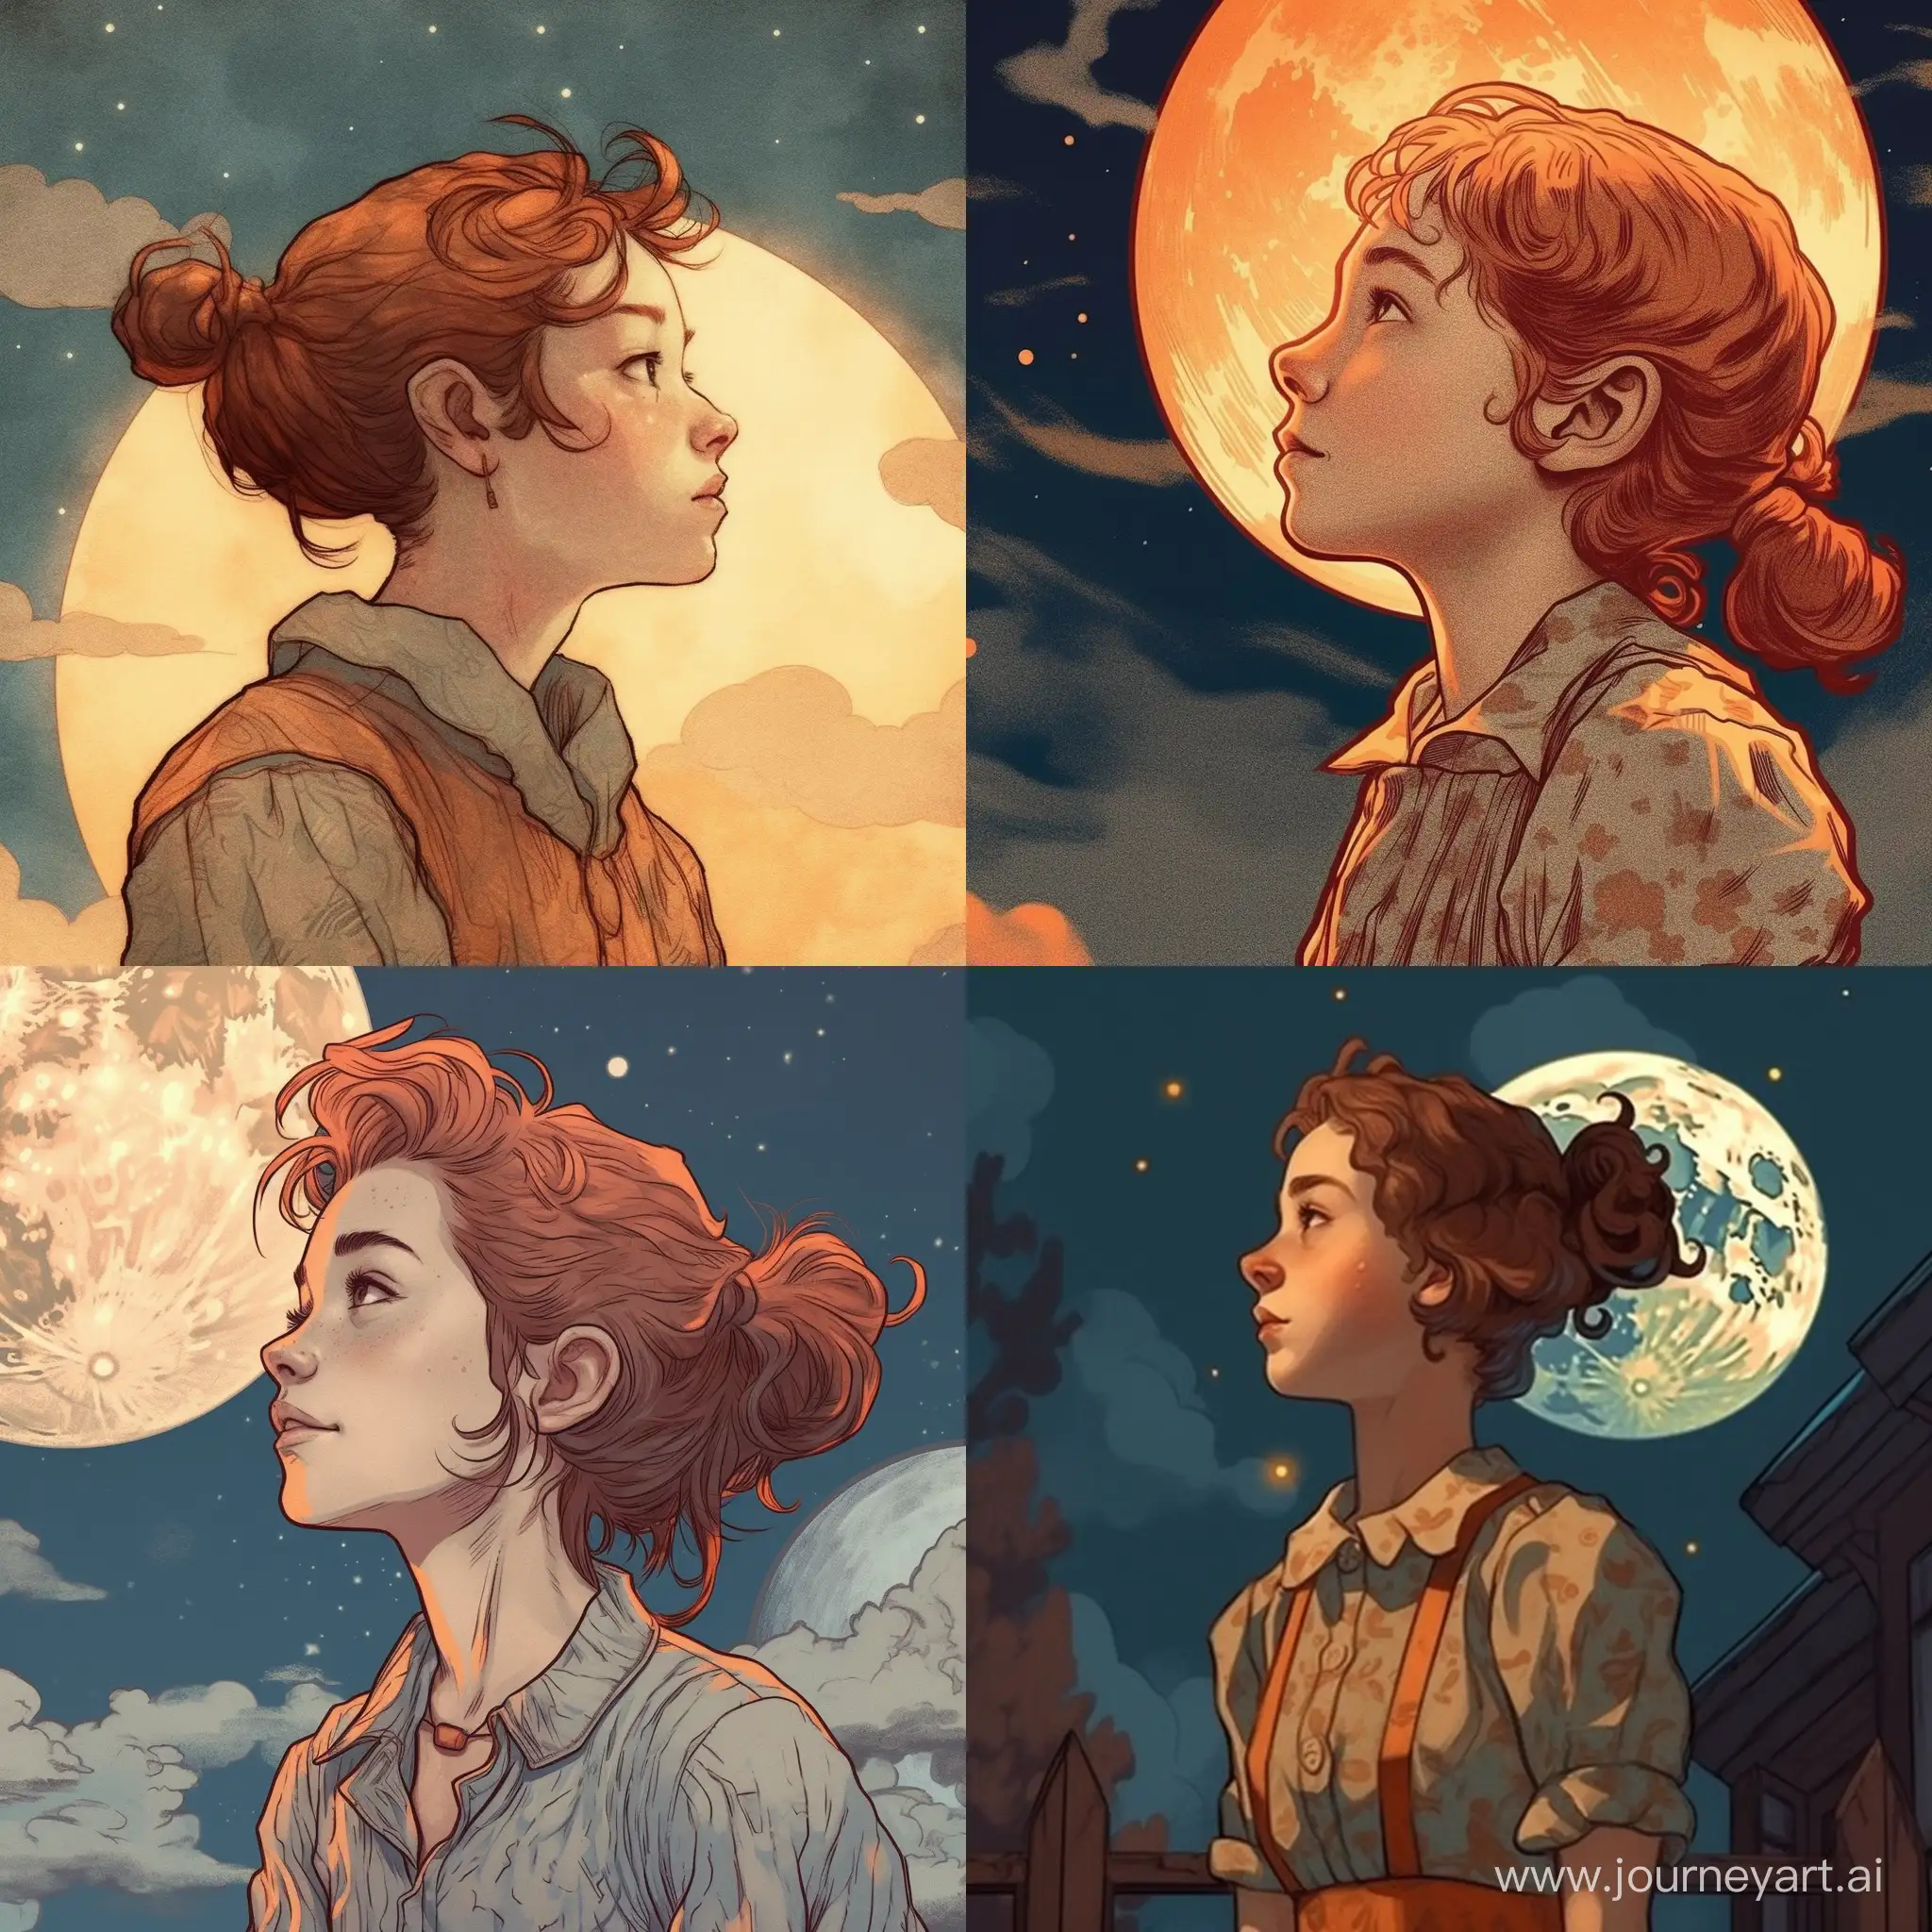 Girl-Contemplating-Moon-Nostalgic-Illustration-in-Norman-Rockwell-Style